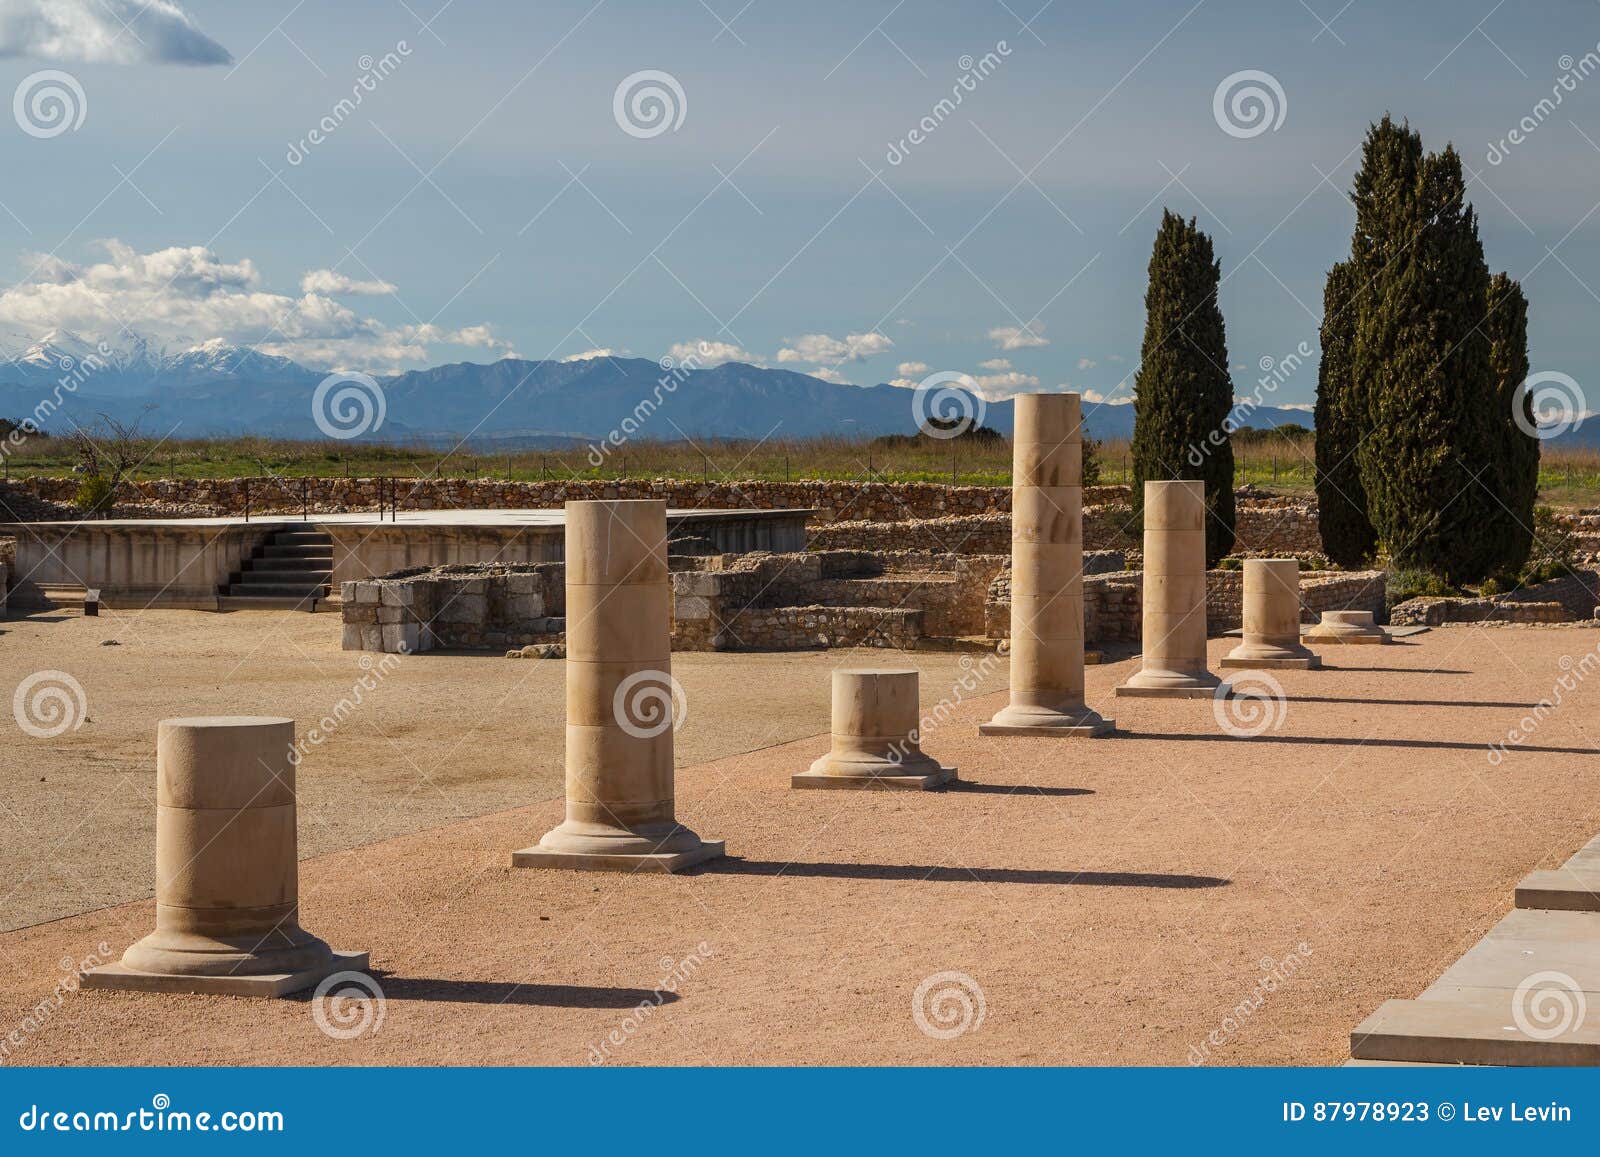 ruins of the ancient greek and roman town ampurias, near gerona